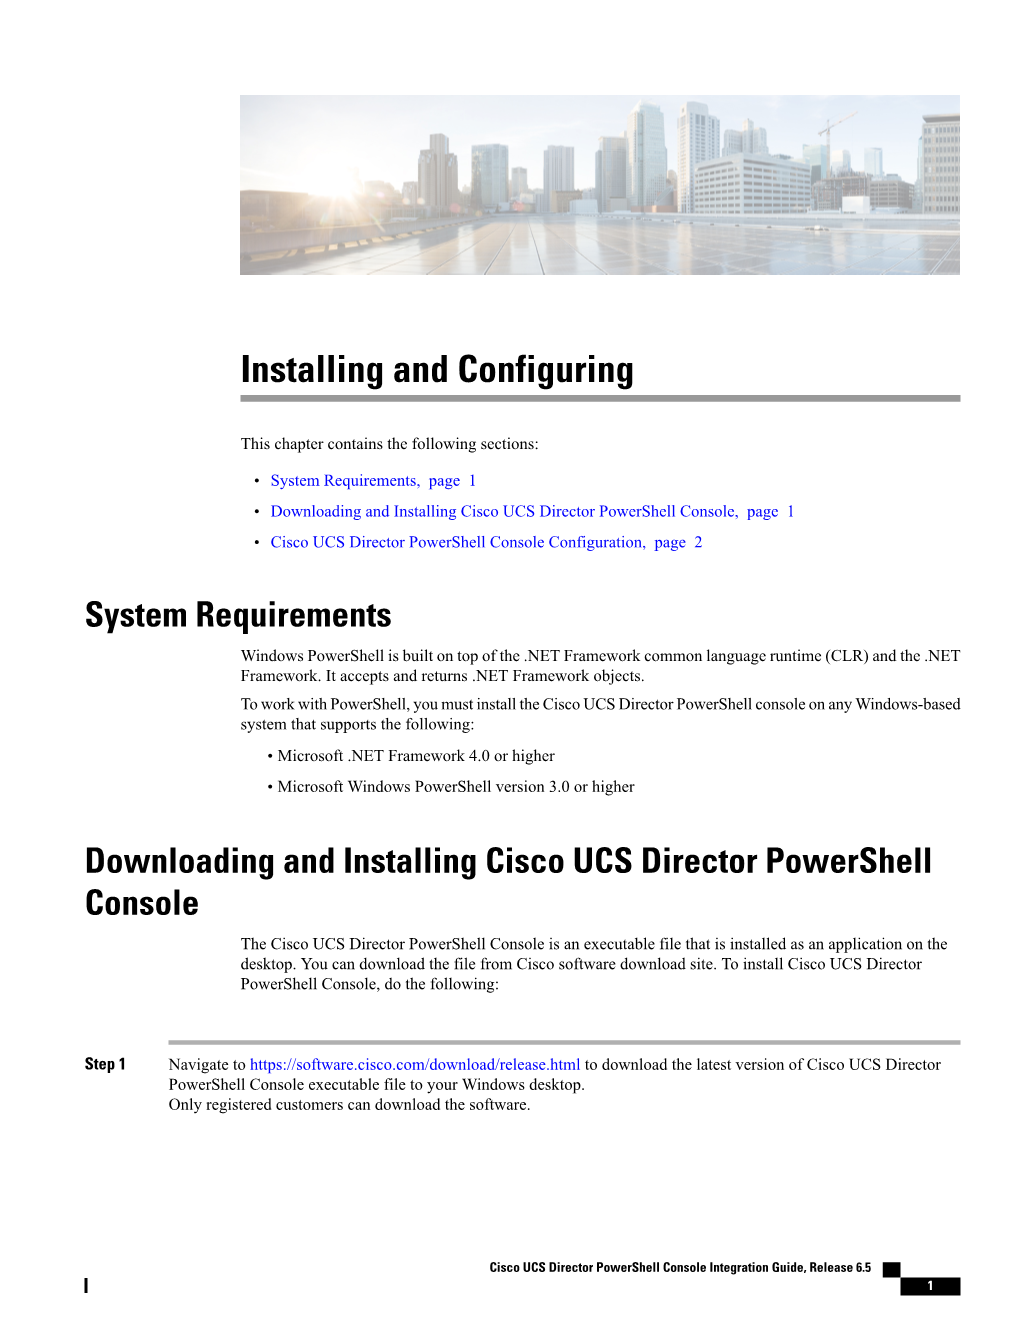 Cisco UCS Director Powershell Console Configuration, Page 2